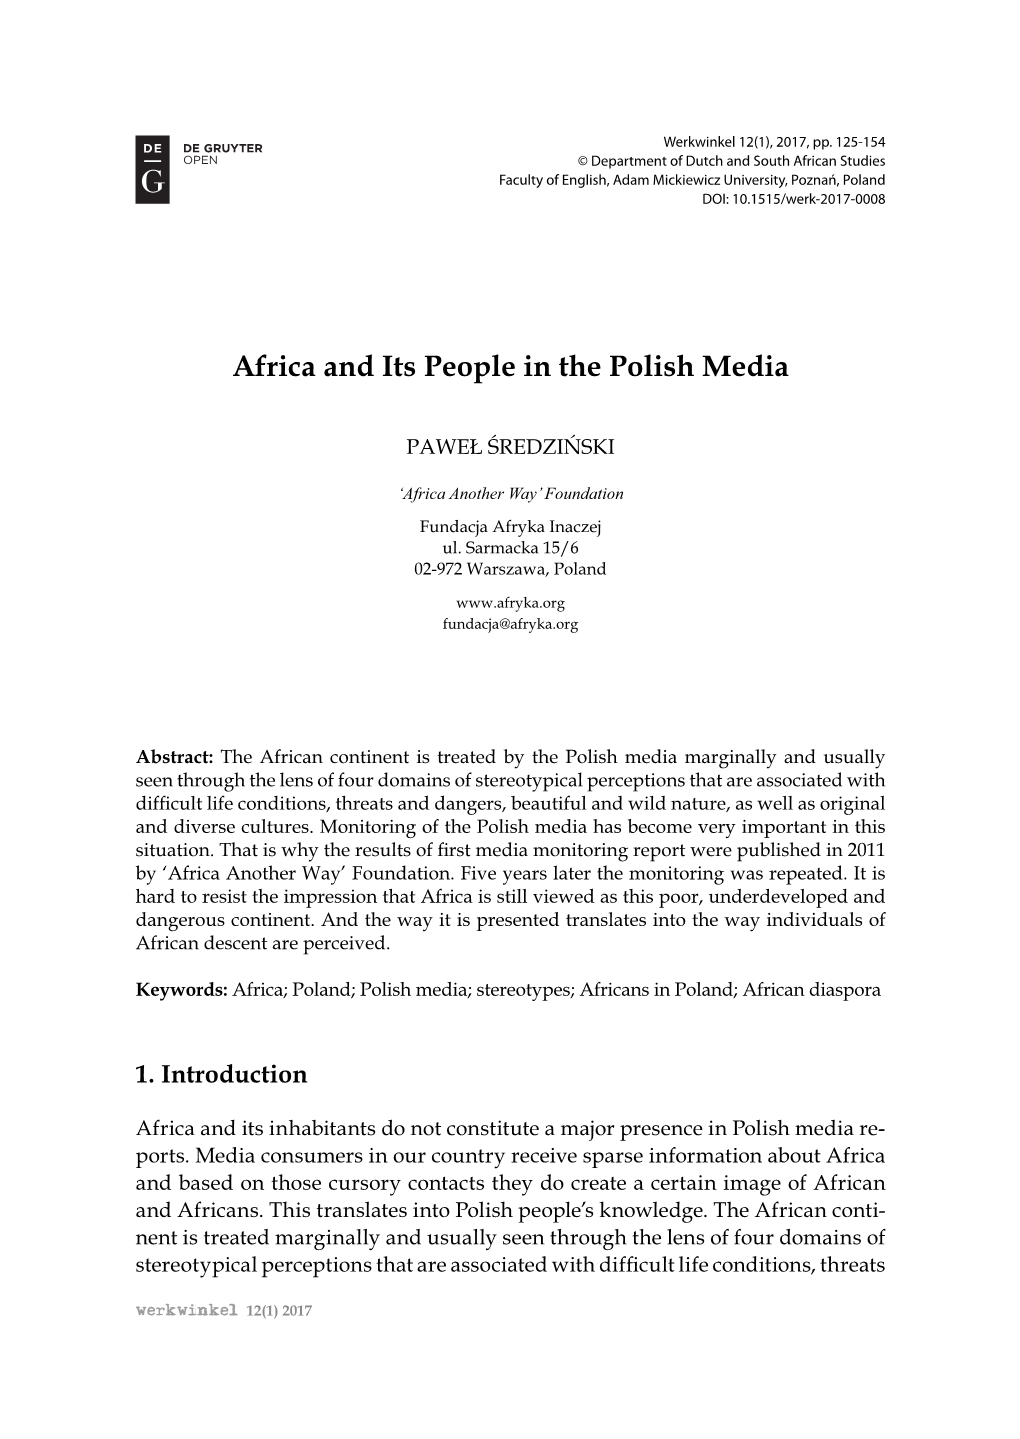 Africa and Its People in the Polish Media